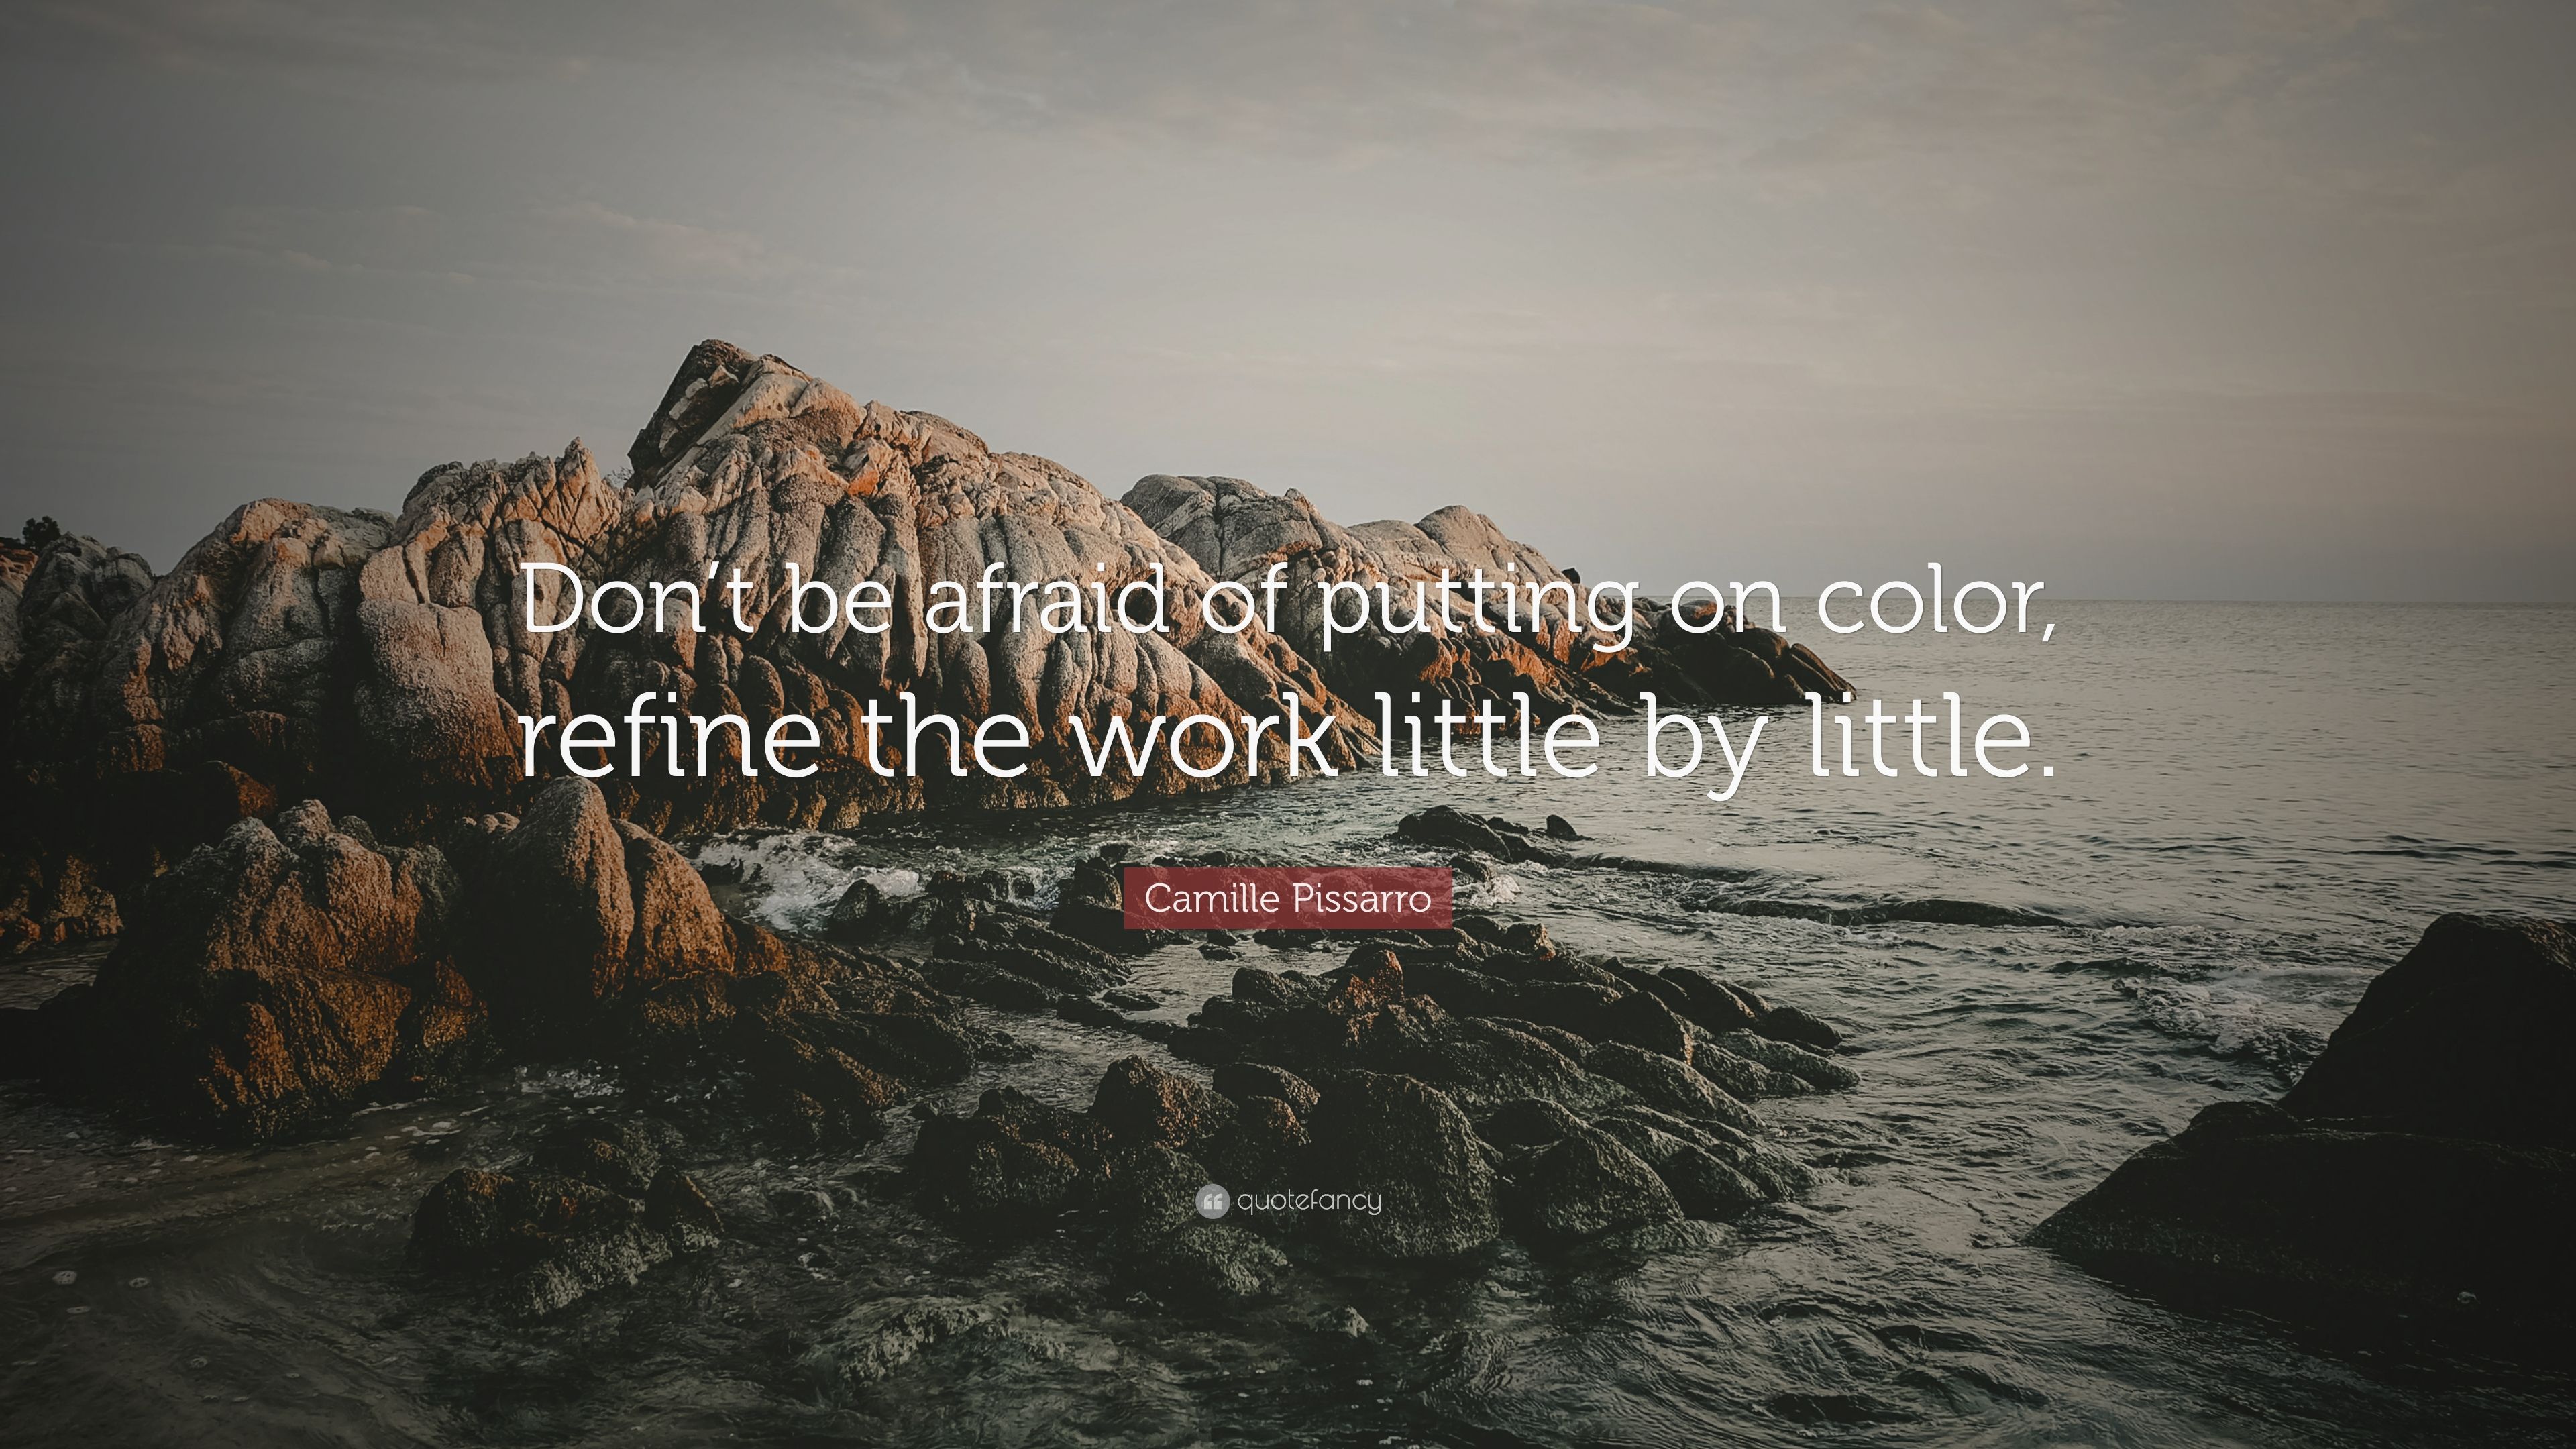 Camille Pissarro Quote: “Don't be afraid of putting on color, refine the work little by little.” (7 wallpaper)